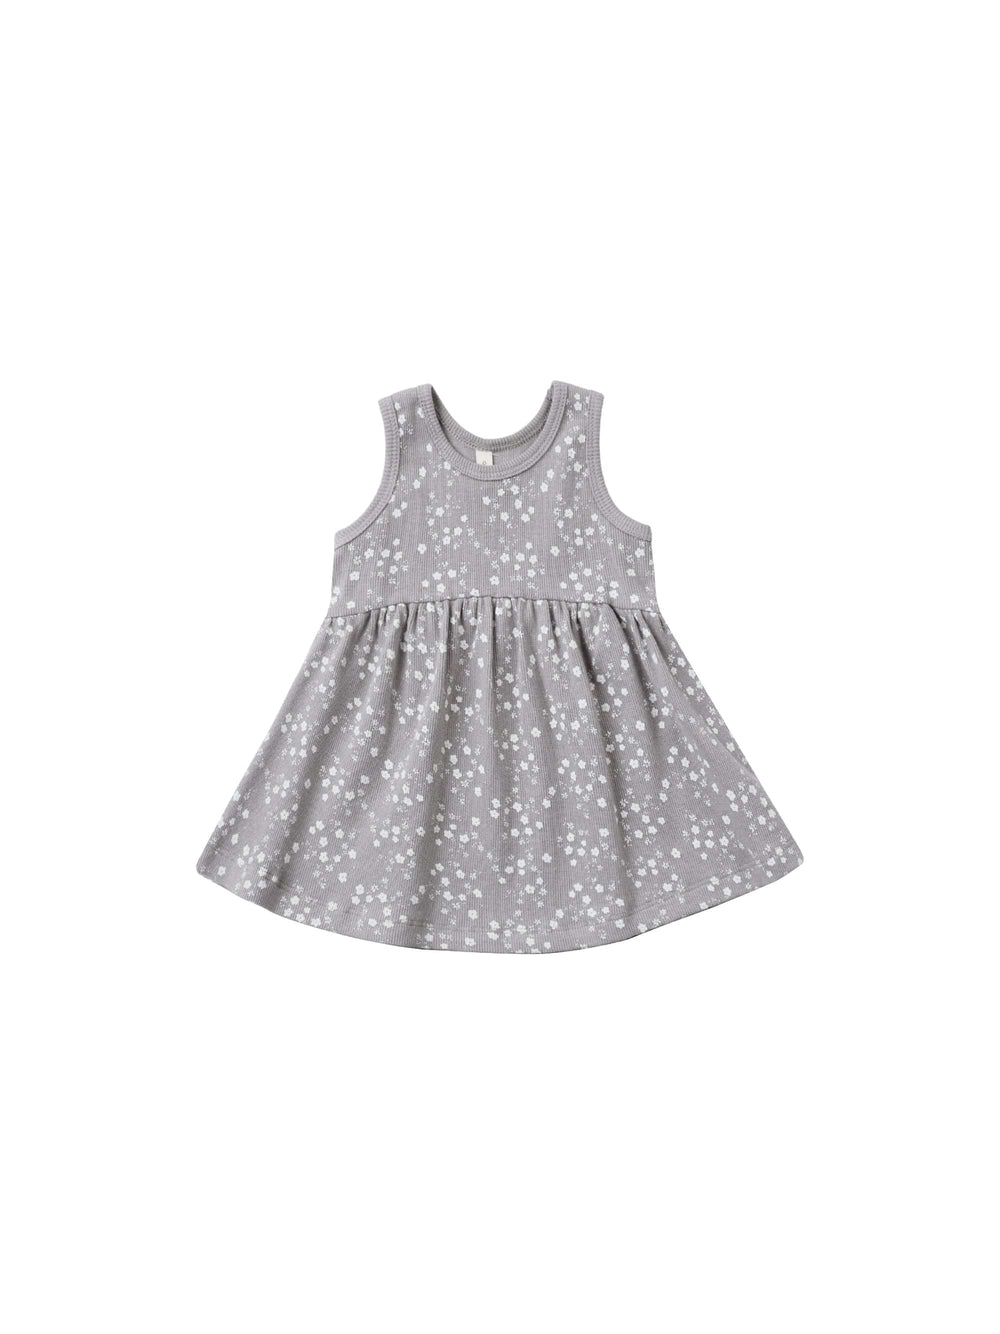 Quincy Mae Baby & Toddler Dresses Ribbed Tank Dress - Fleur